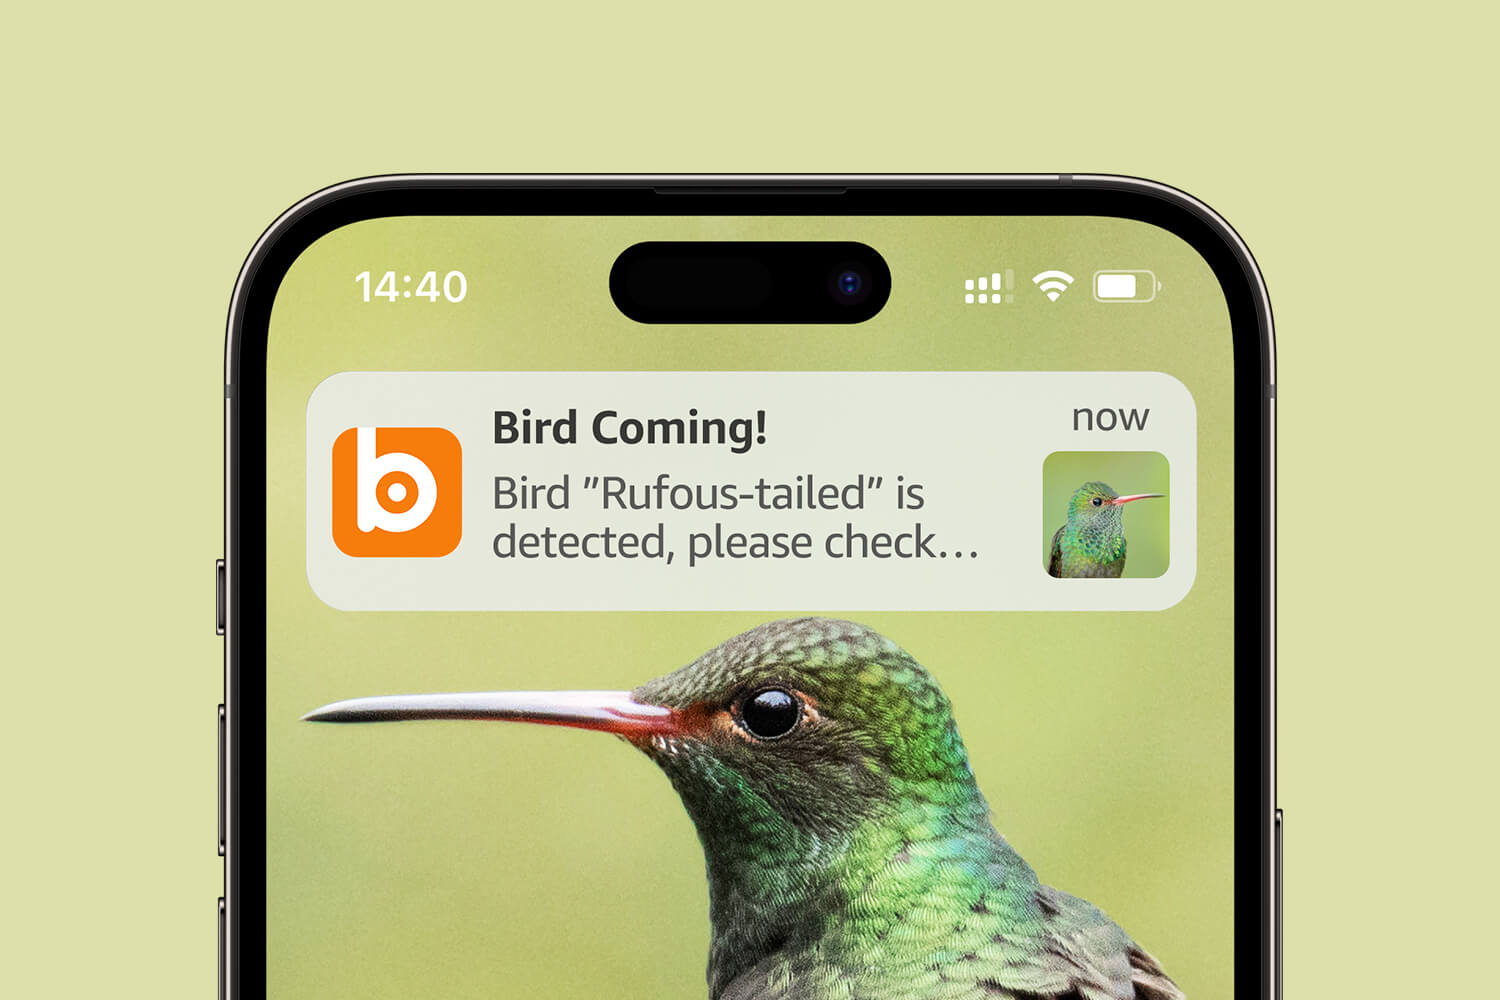 Receive timely notifications whenever birds visit, So you won't miss any hummingbirds that make you smile.